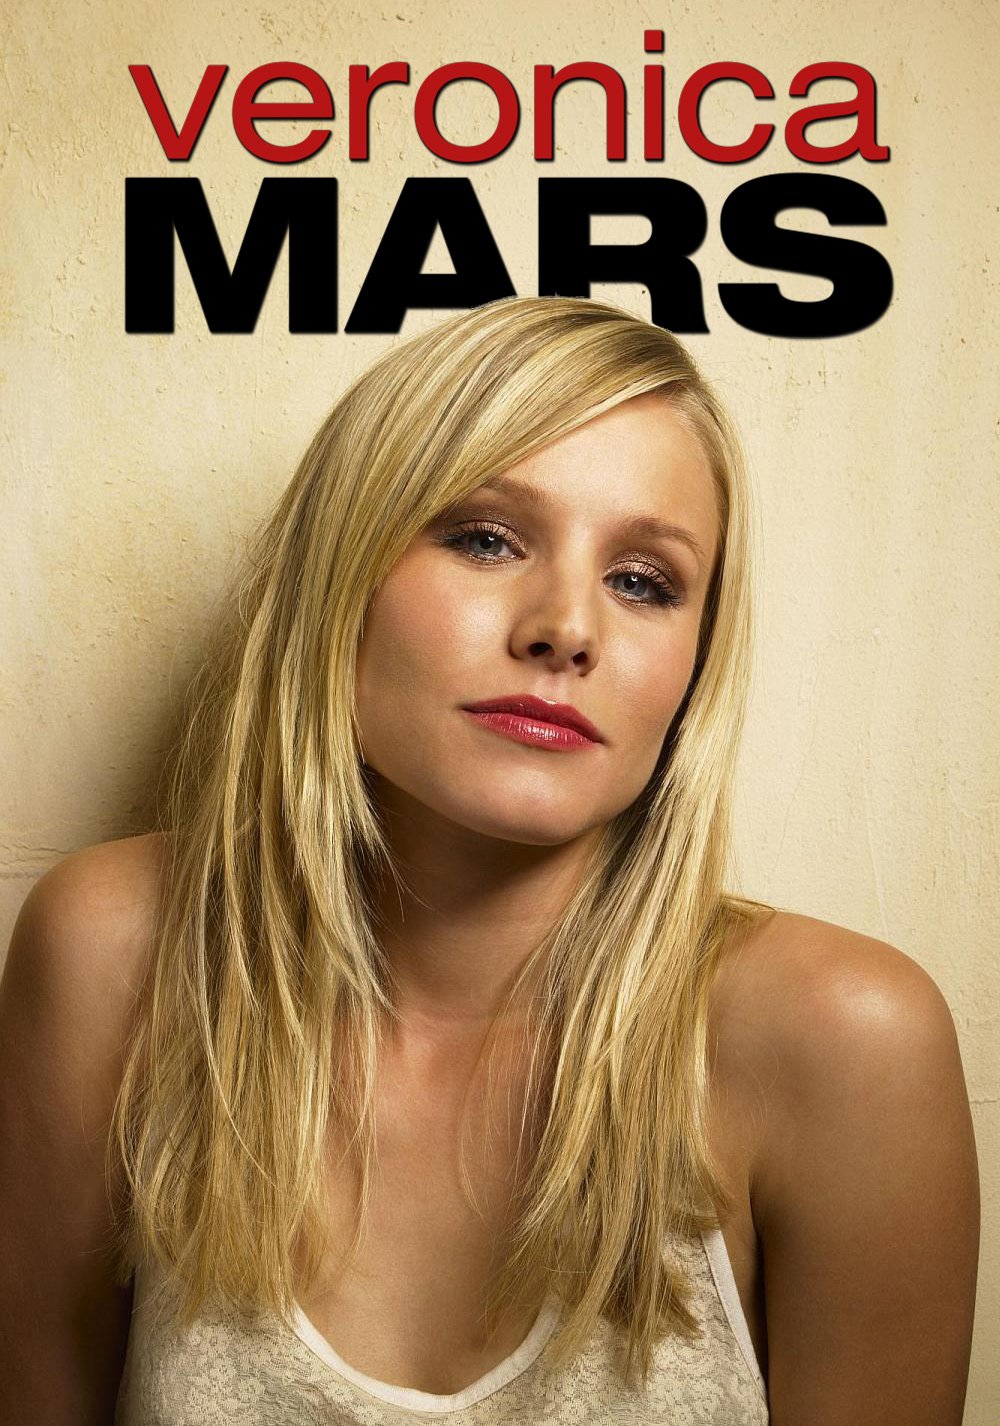 Veronica Mars Movie Poster ID 141076 Image Abyss